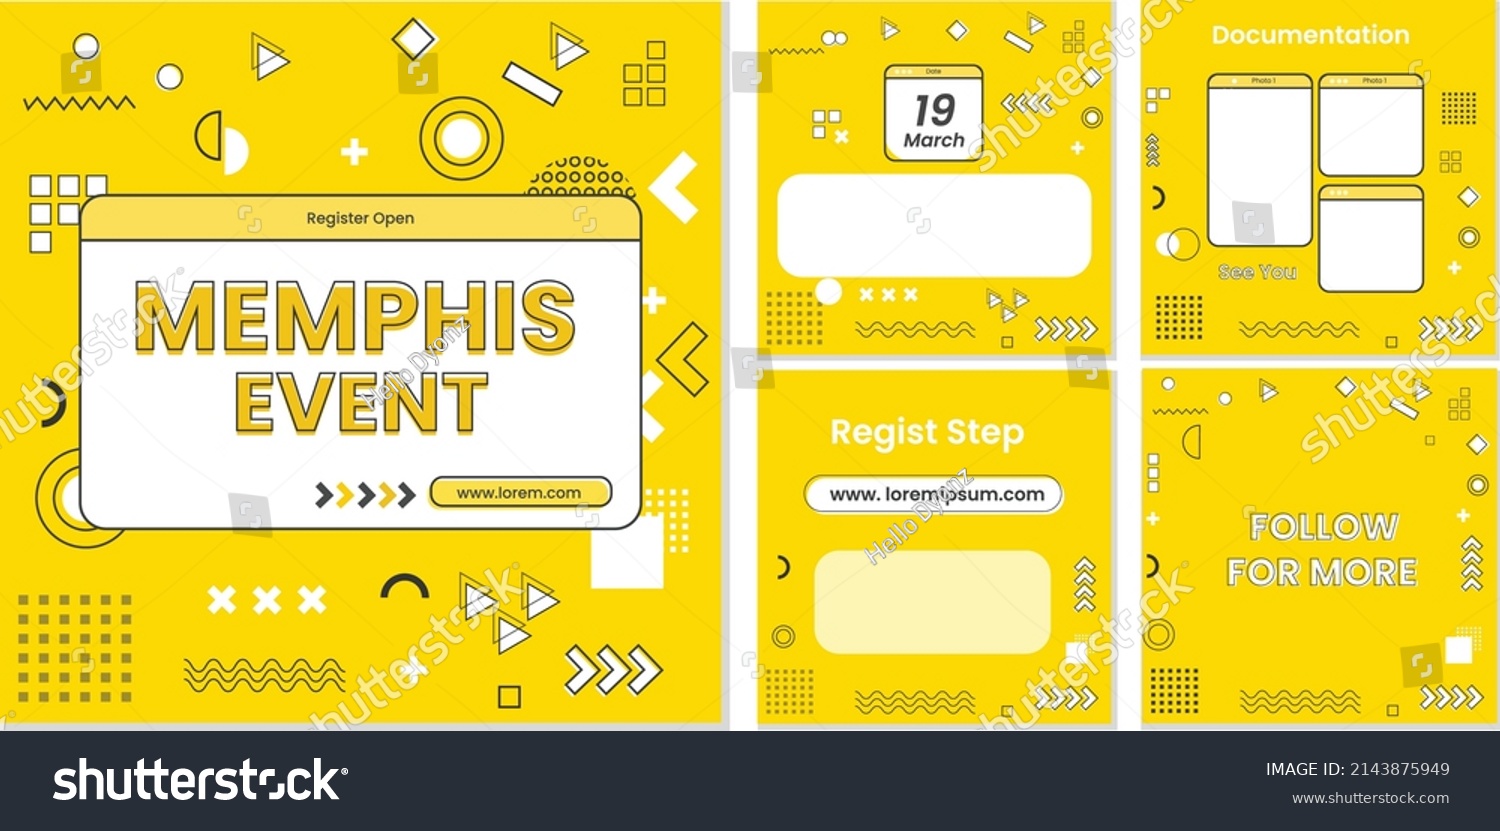 SVG of Memphis event feed pack design with assorted yellow and black modern geometric elements. Memphis template design social media background memphis event feed poster design many memphis assets style eps svg